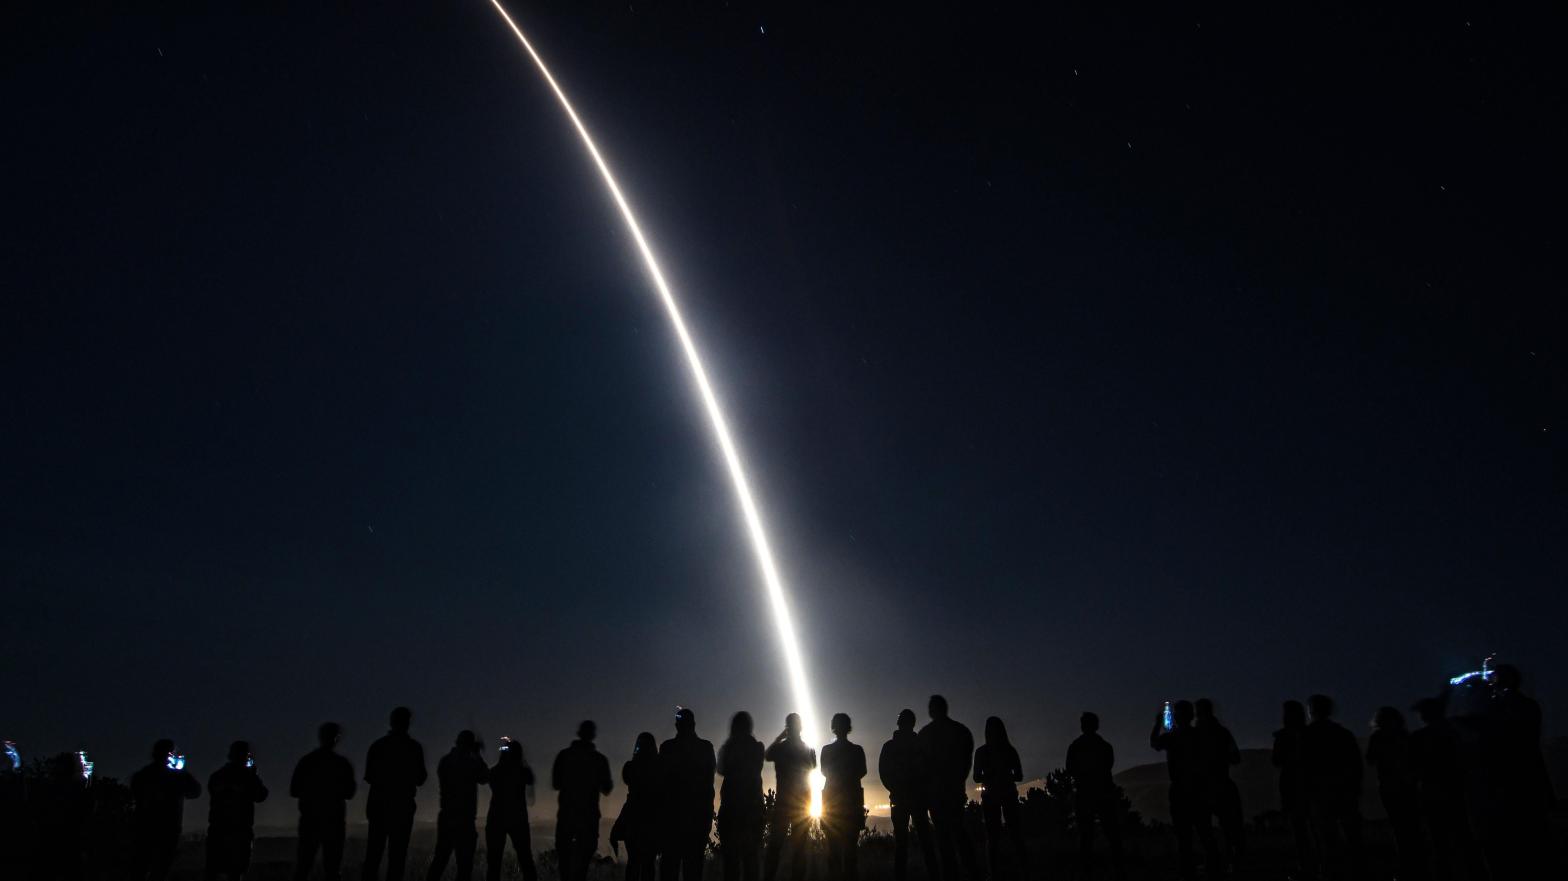 The Space Force launched an unarmed ballistic missile during an operational test on September 7. (Photo: Ryan Quijas, AP)